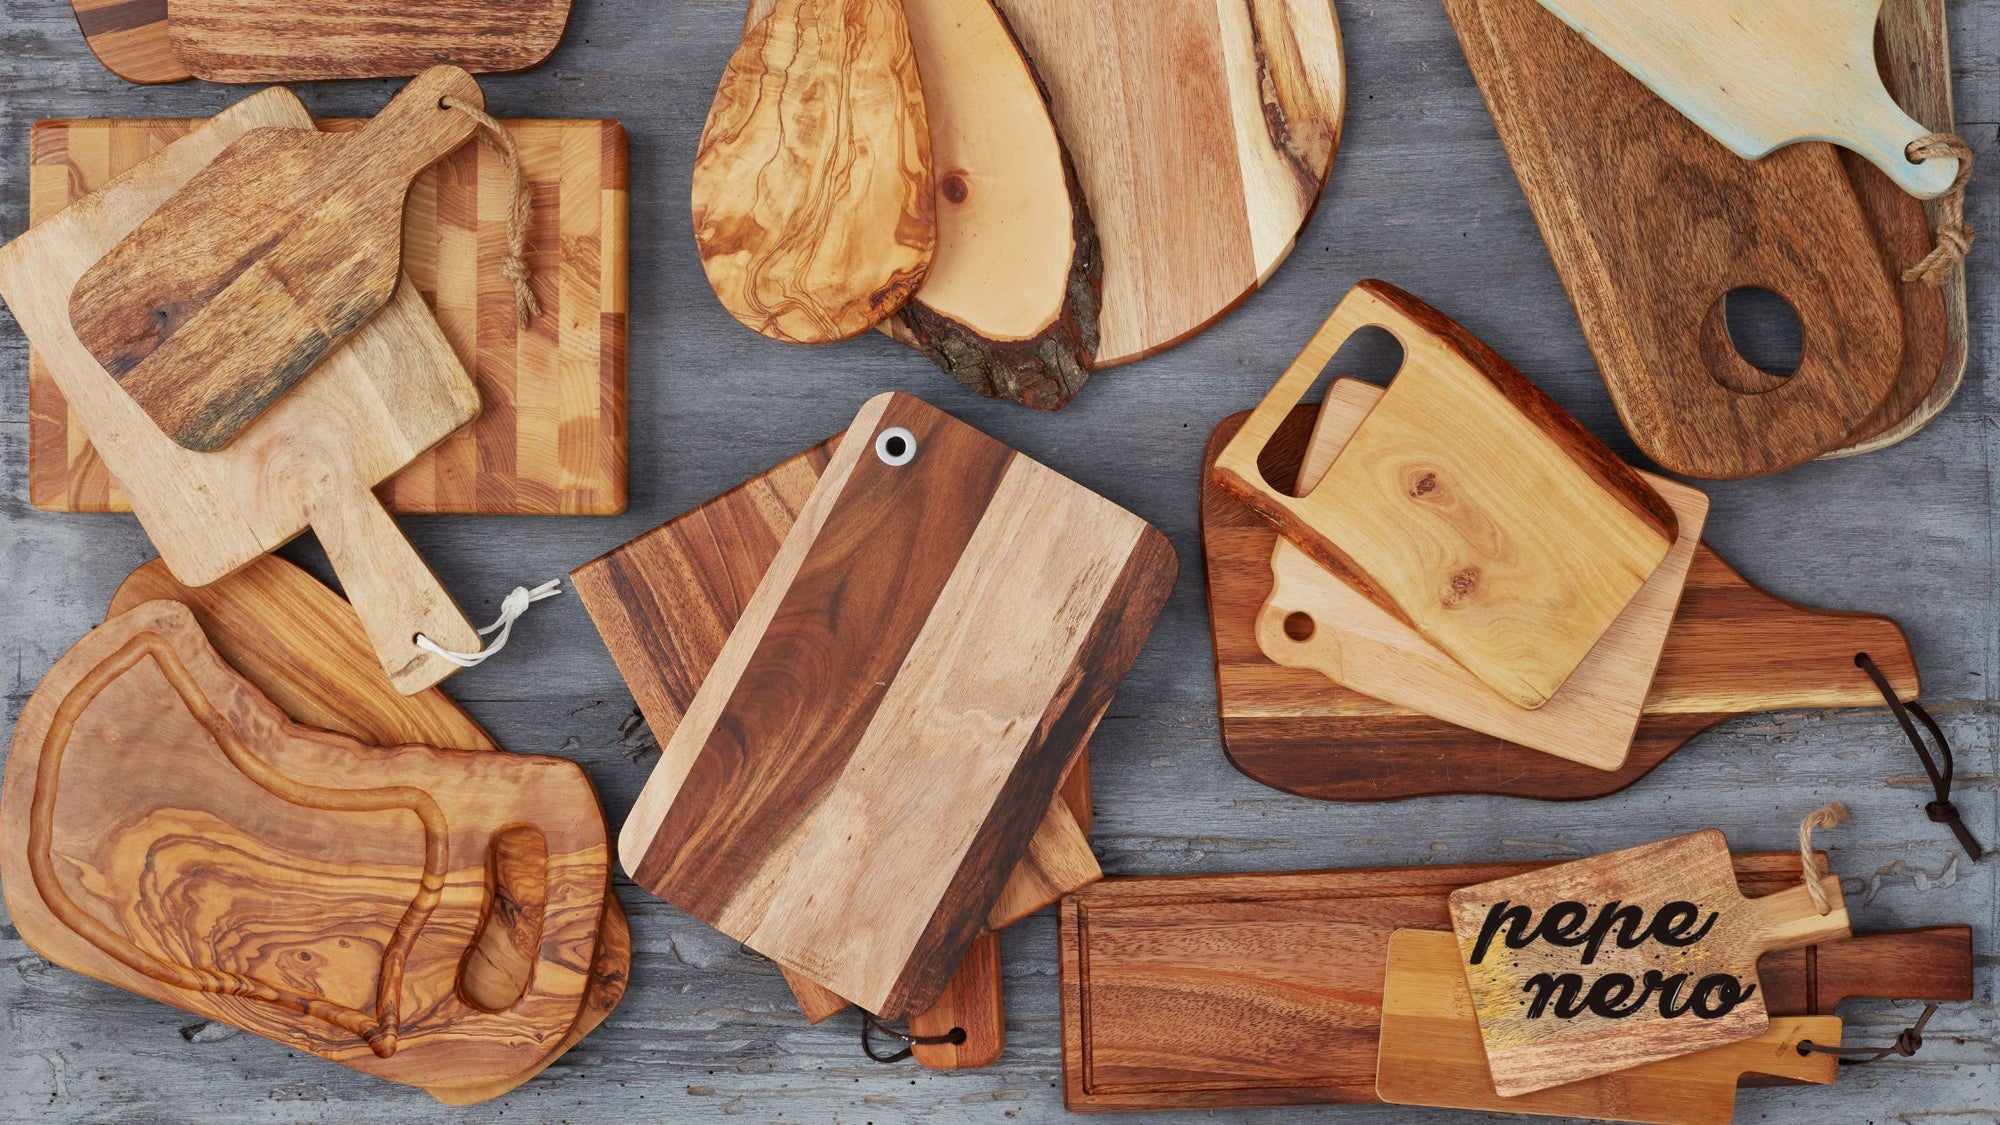 A variety of different shapes and sizes of wooden chopping boards